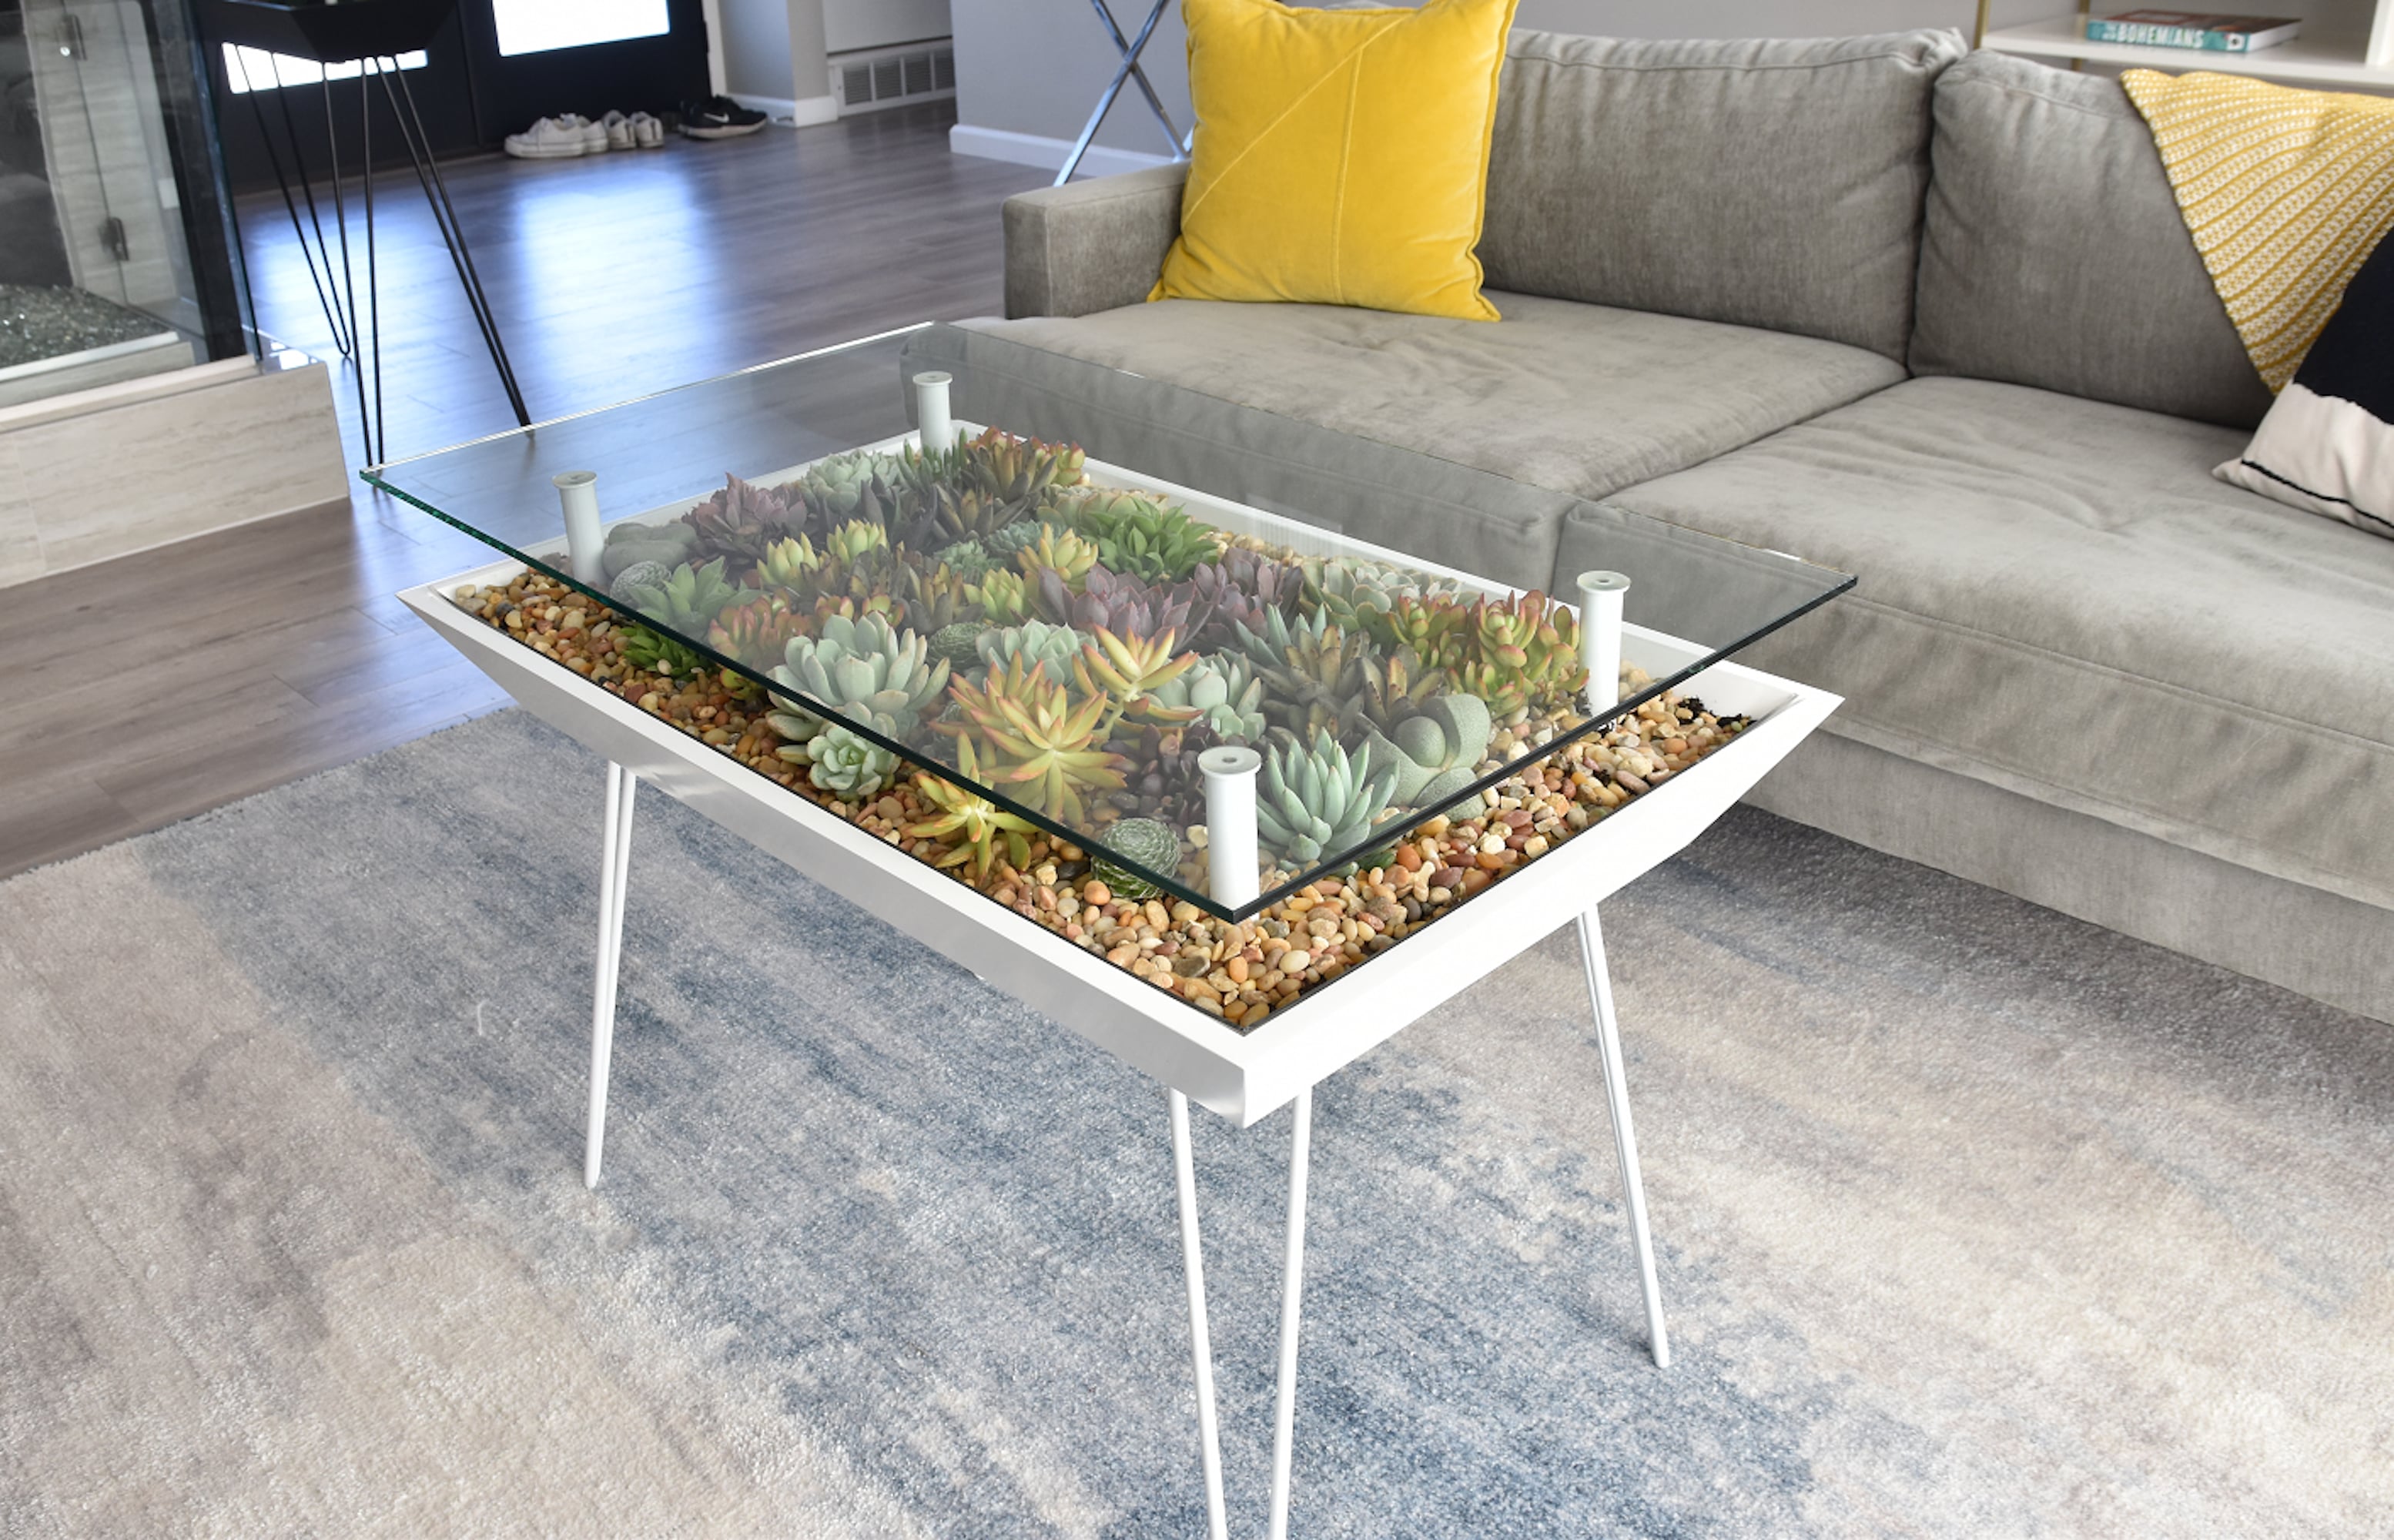 This stylish side table doubles as a terrarium